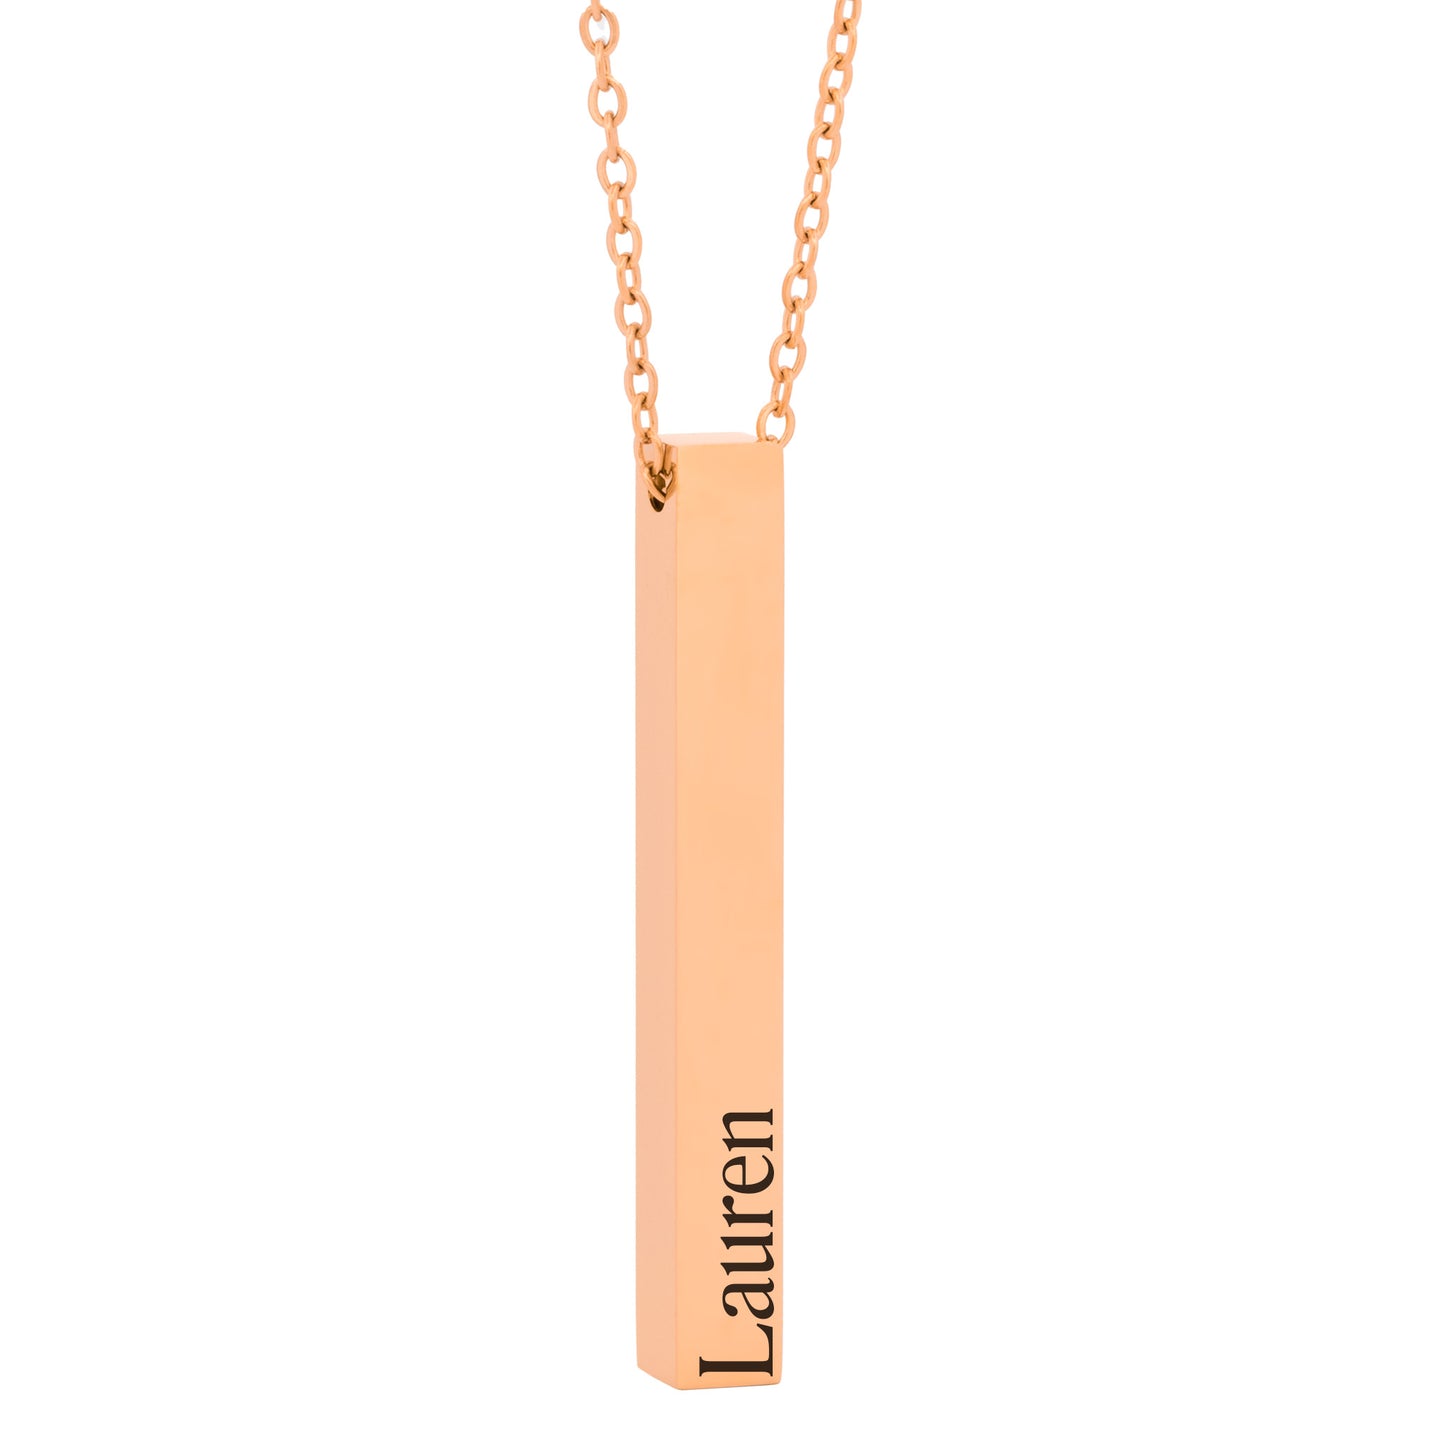 Personalized Engraved Vertical Bar Necklace